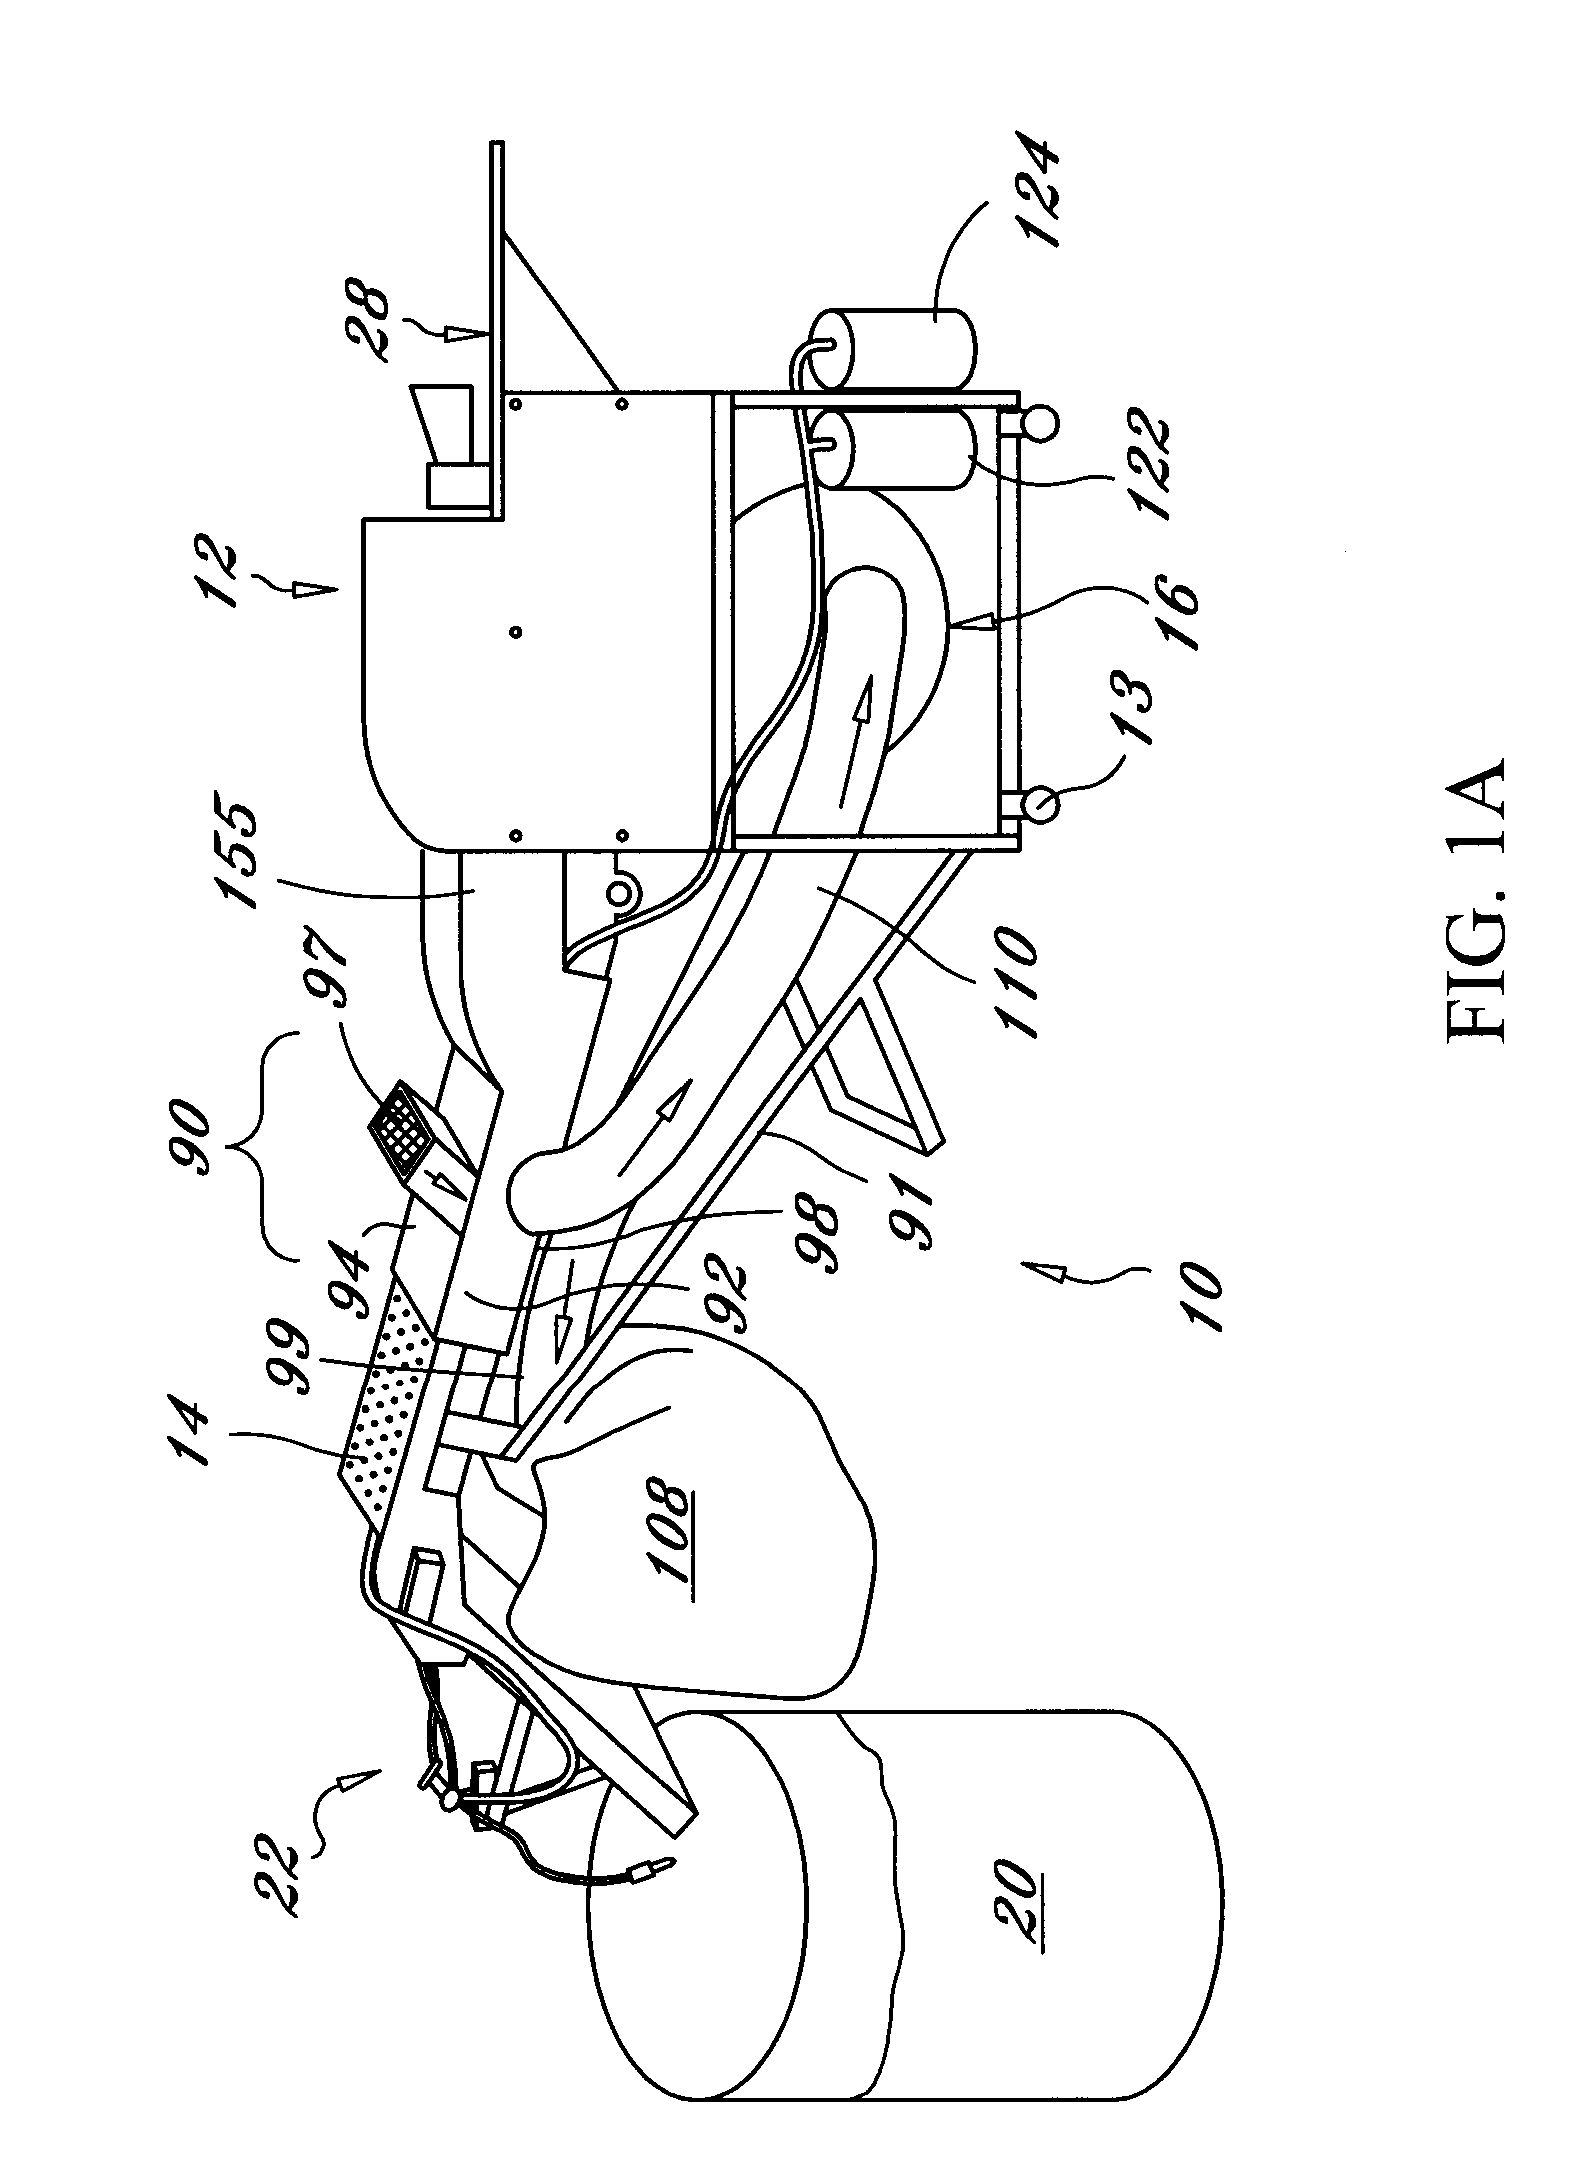 Loose fill packing material and apparatus for manufacturing same